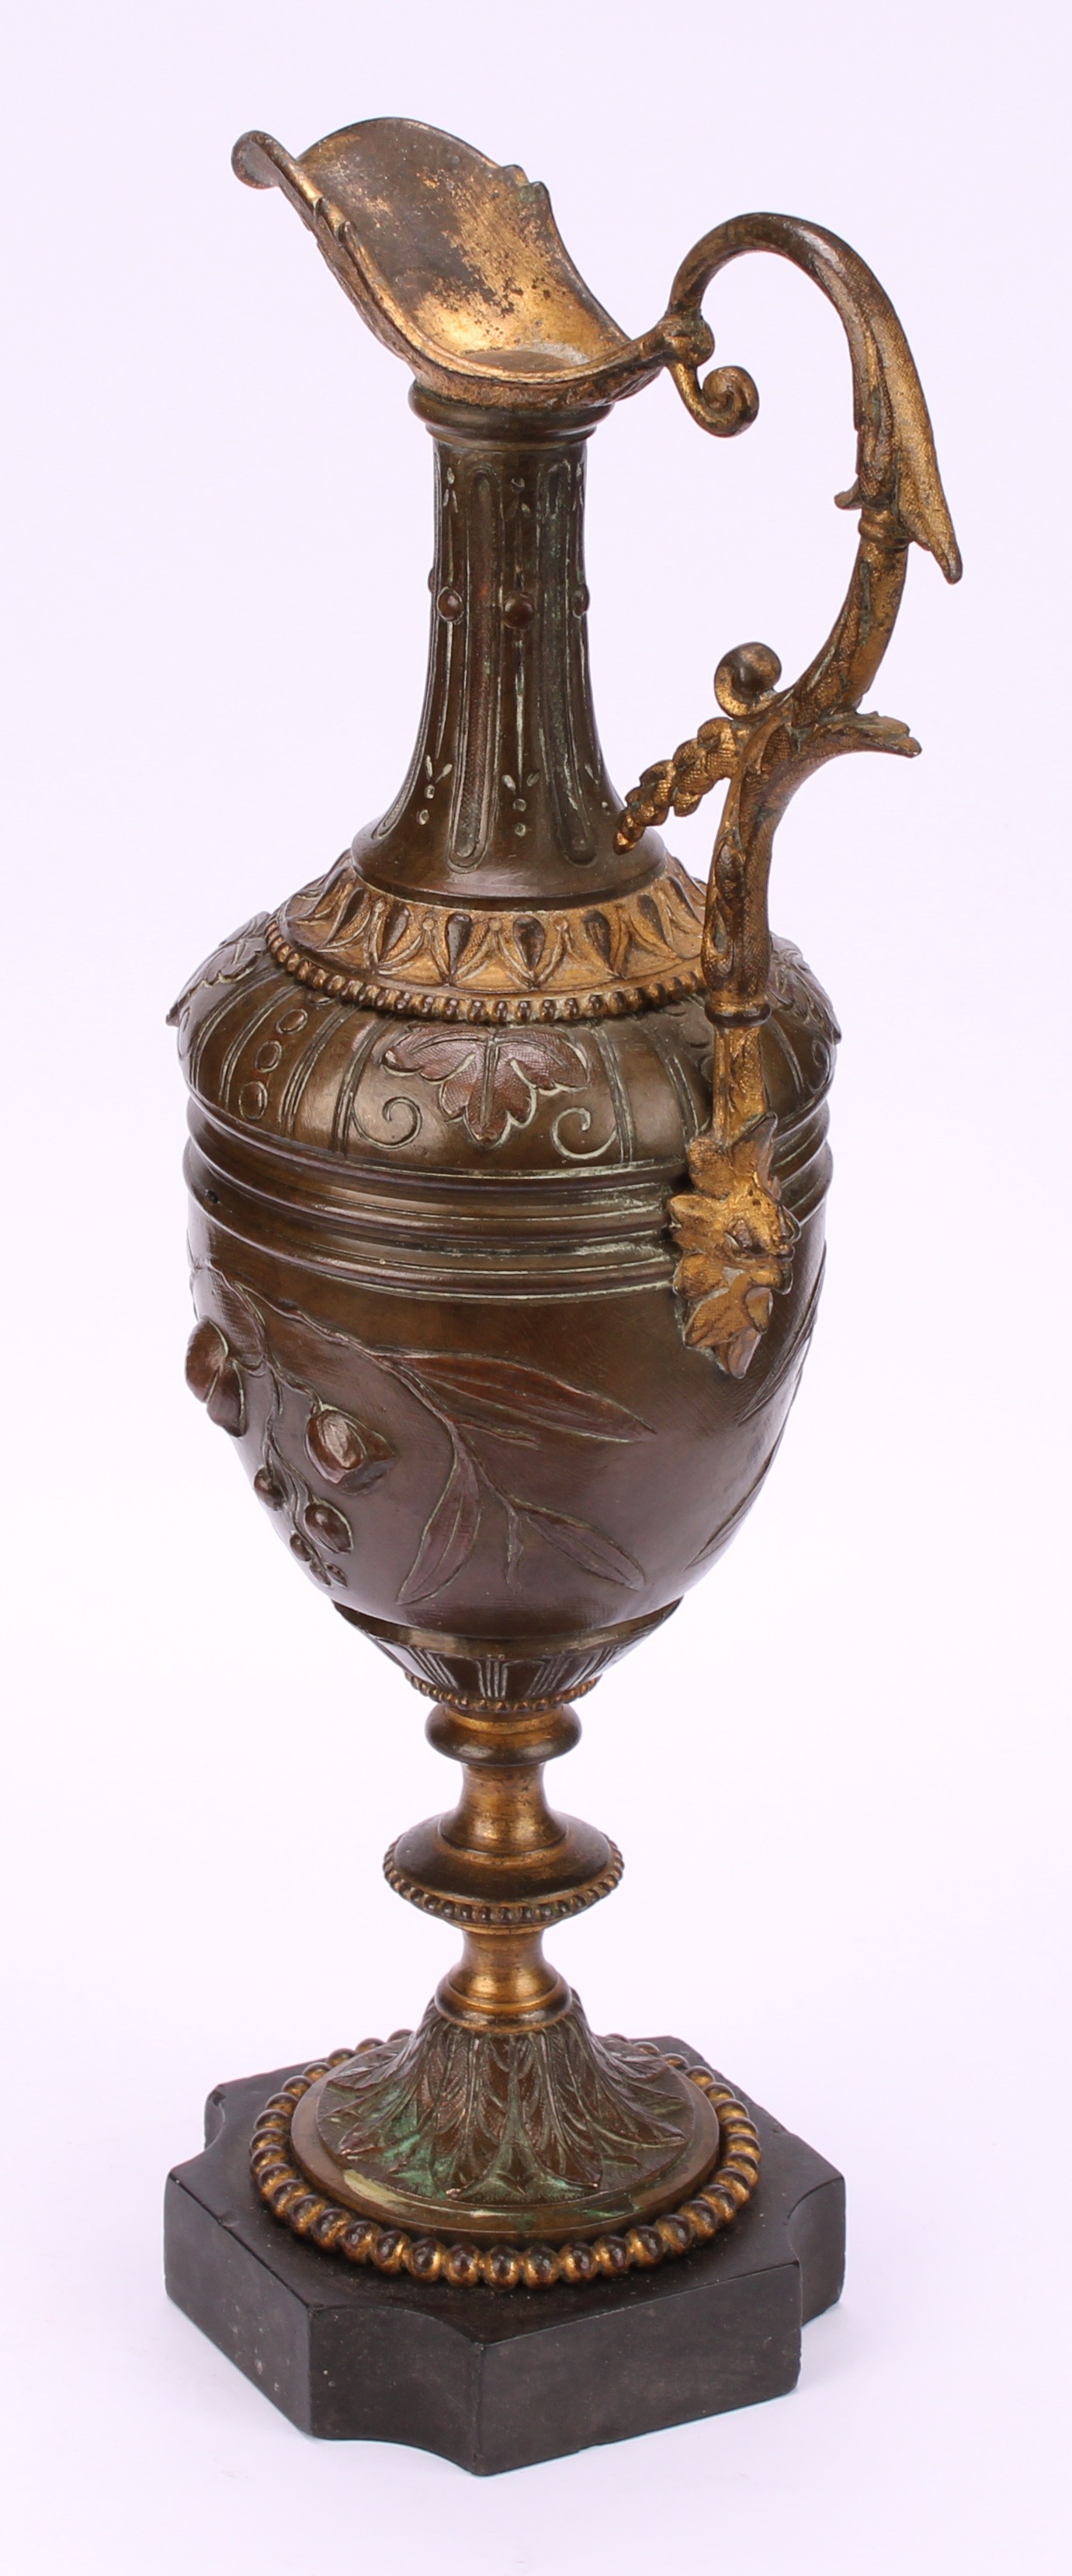 A 19th century Grand Tour ewer, cast with flowers and foliage, scroll handle, knopped stem, black - Image 4 of 4